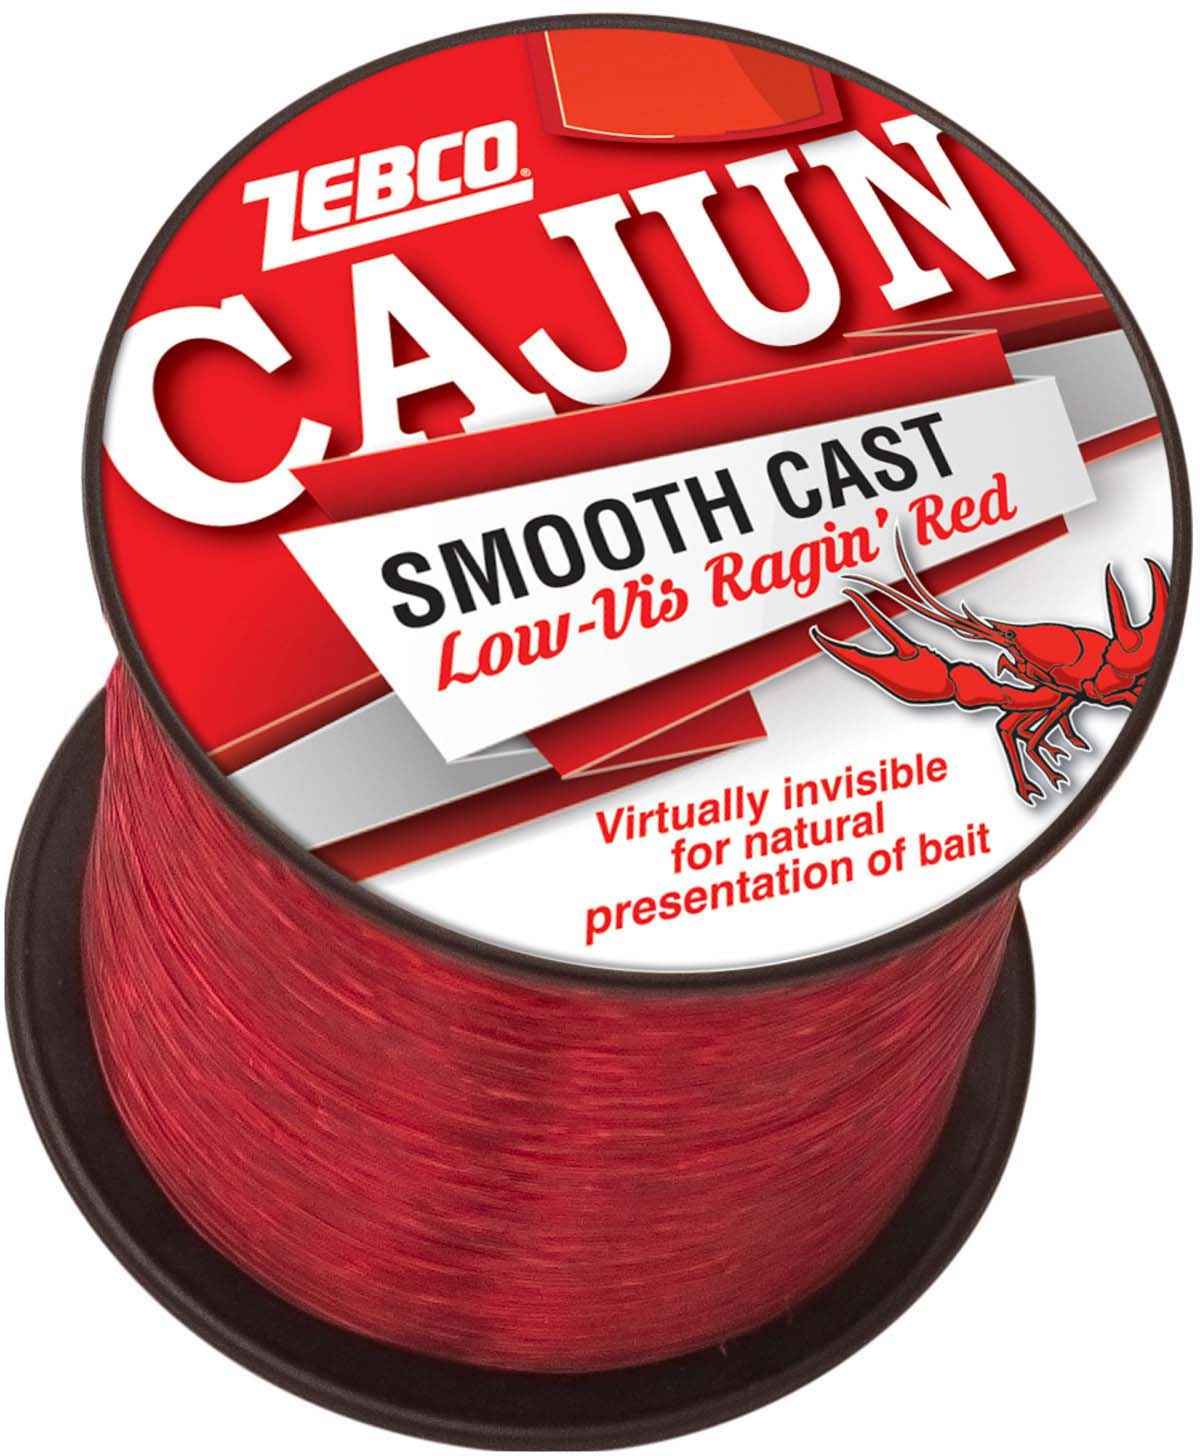 Zebco Cajun Low Vis 1/4 # Spool  Up to 17% Off Free Shipping over